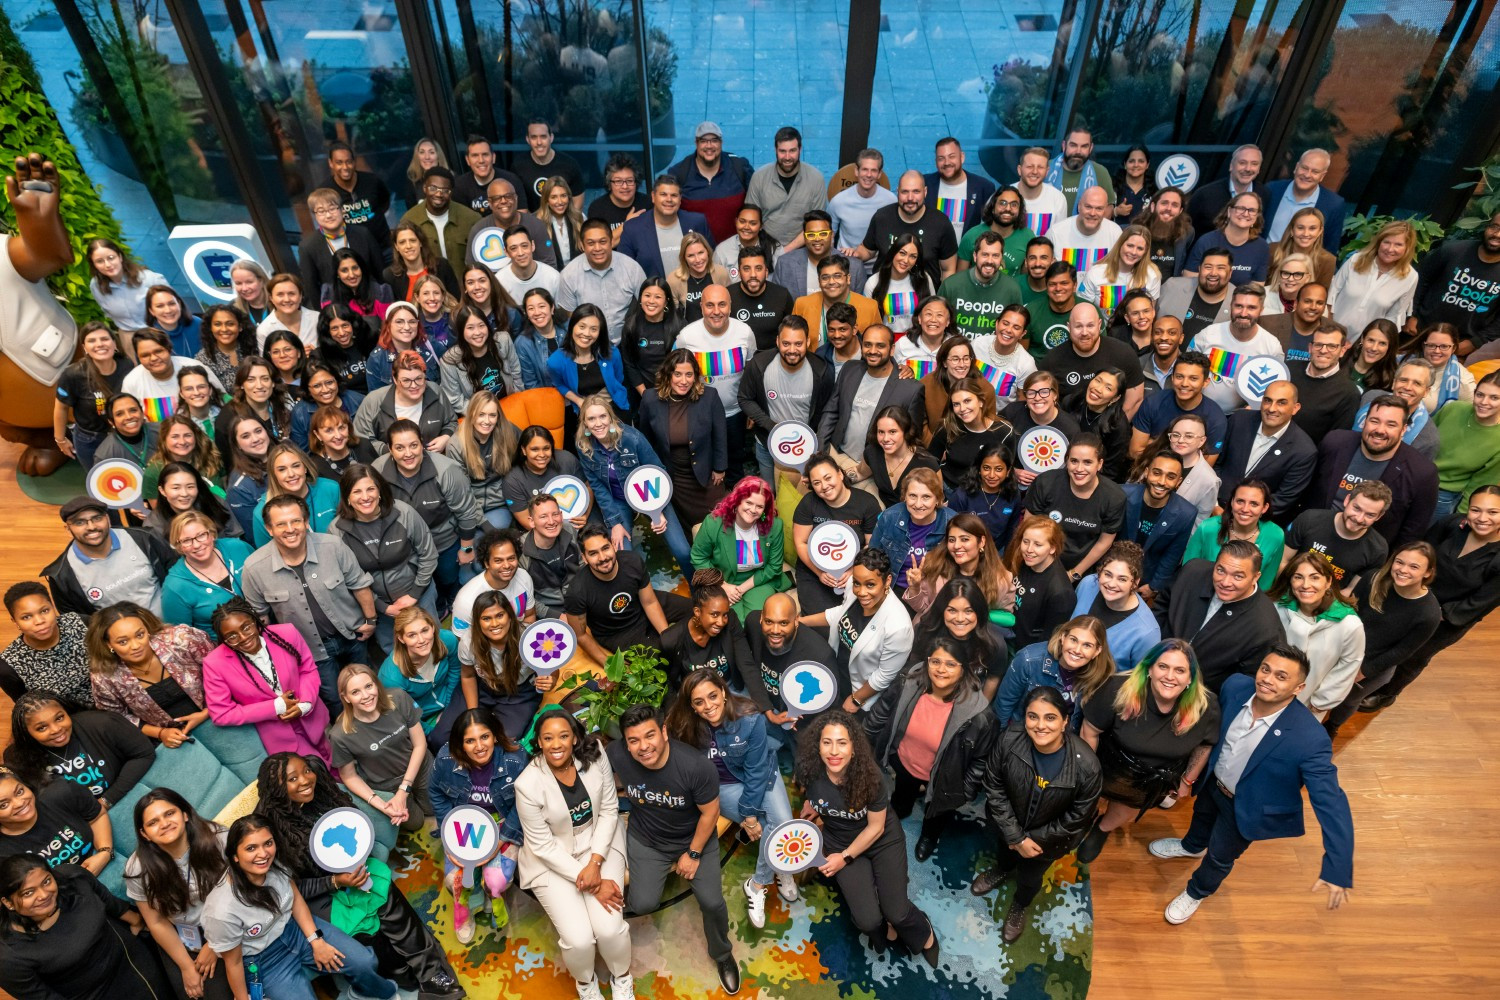 The open concept in Salesforce Tower San Francisco makes it easy for employees to connect and collaborate. 